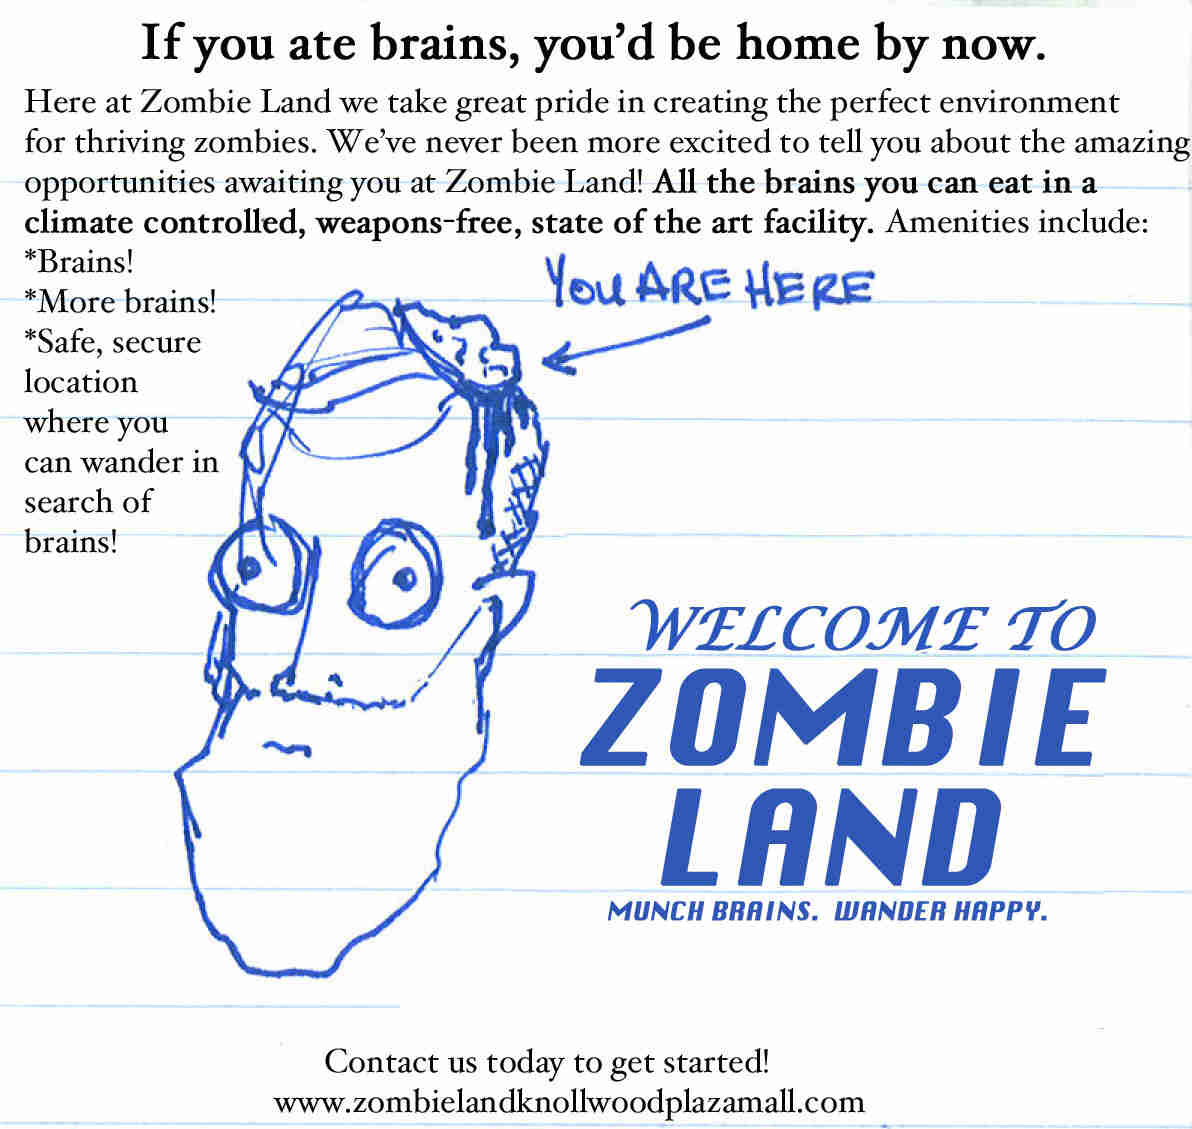 A print ad for Zombie Land - typed black text with a blue ink pen drawing of a person's head